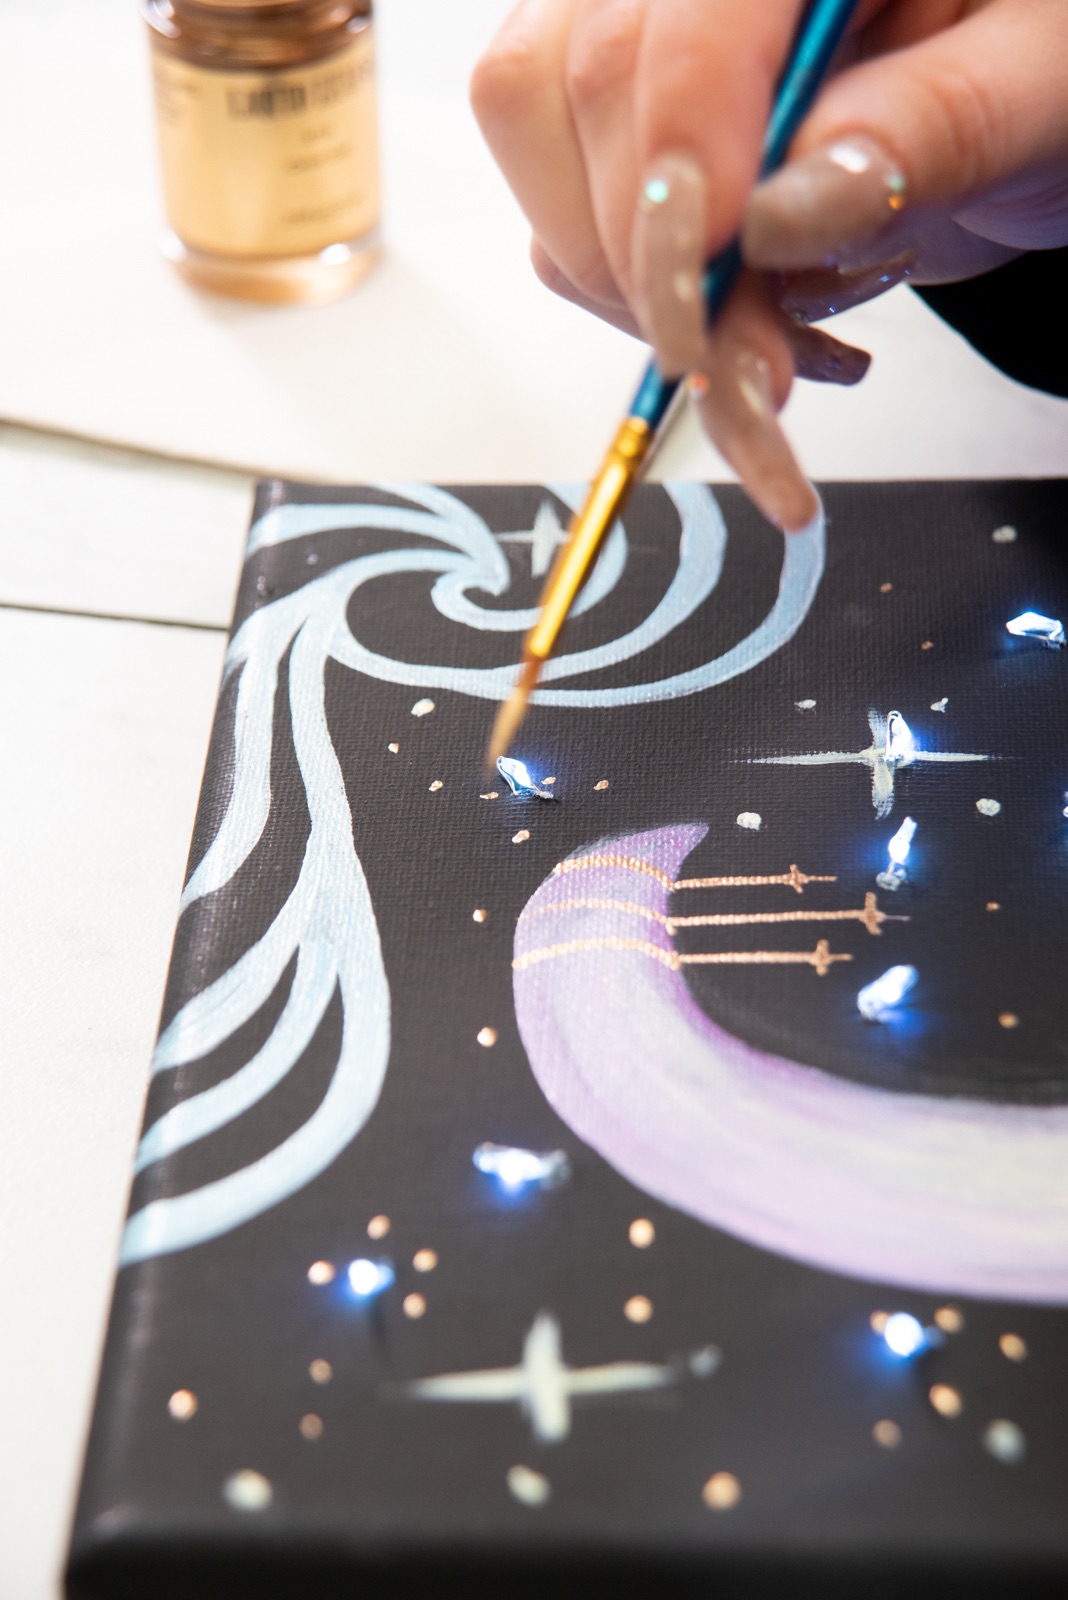 continue to add stars in gilding on the moon painting